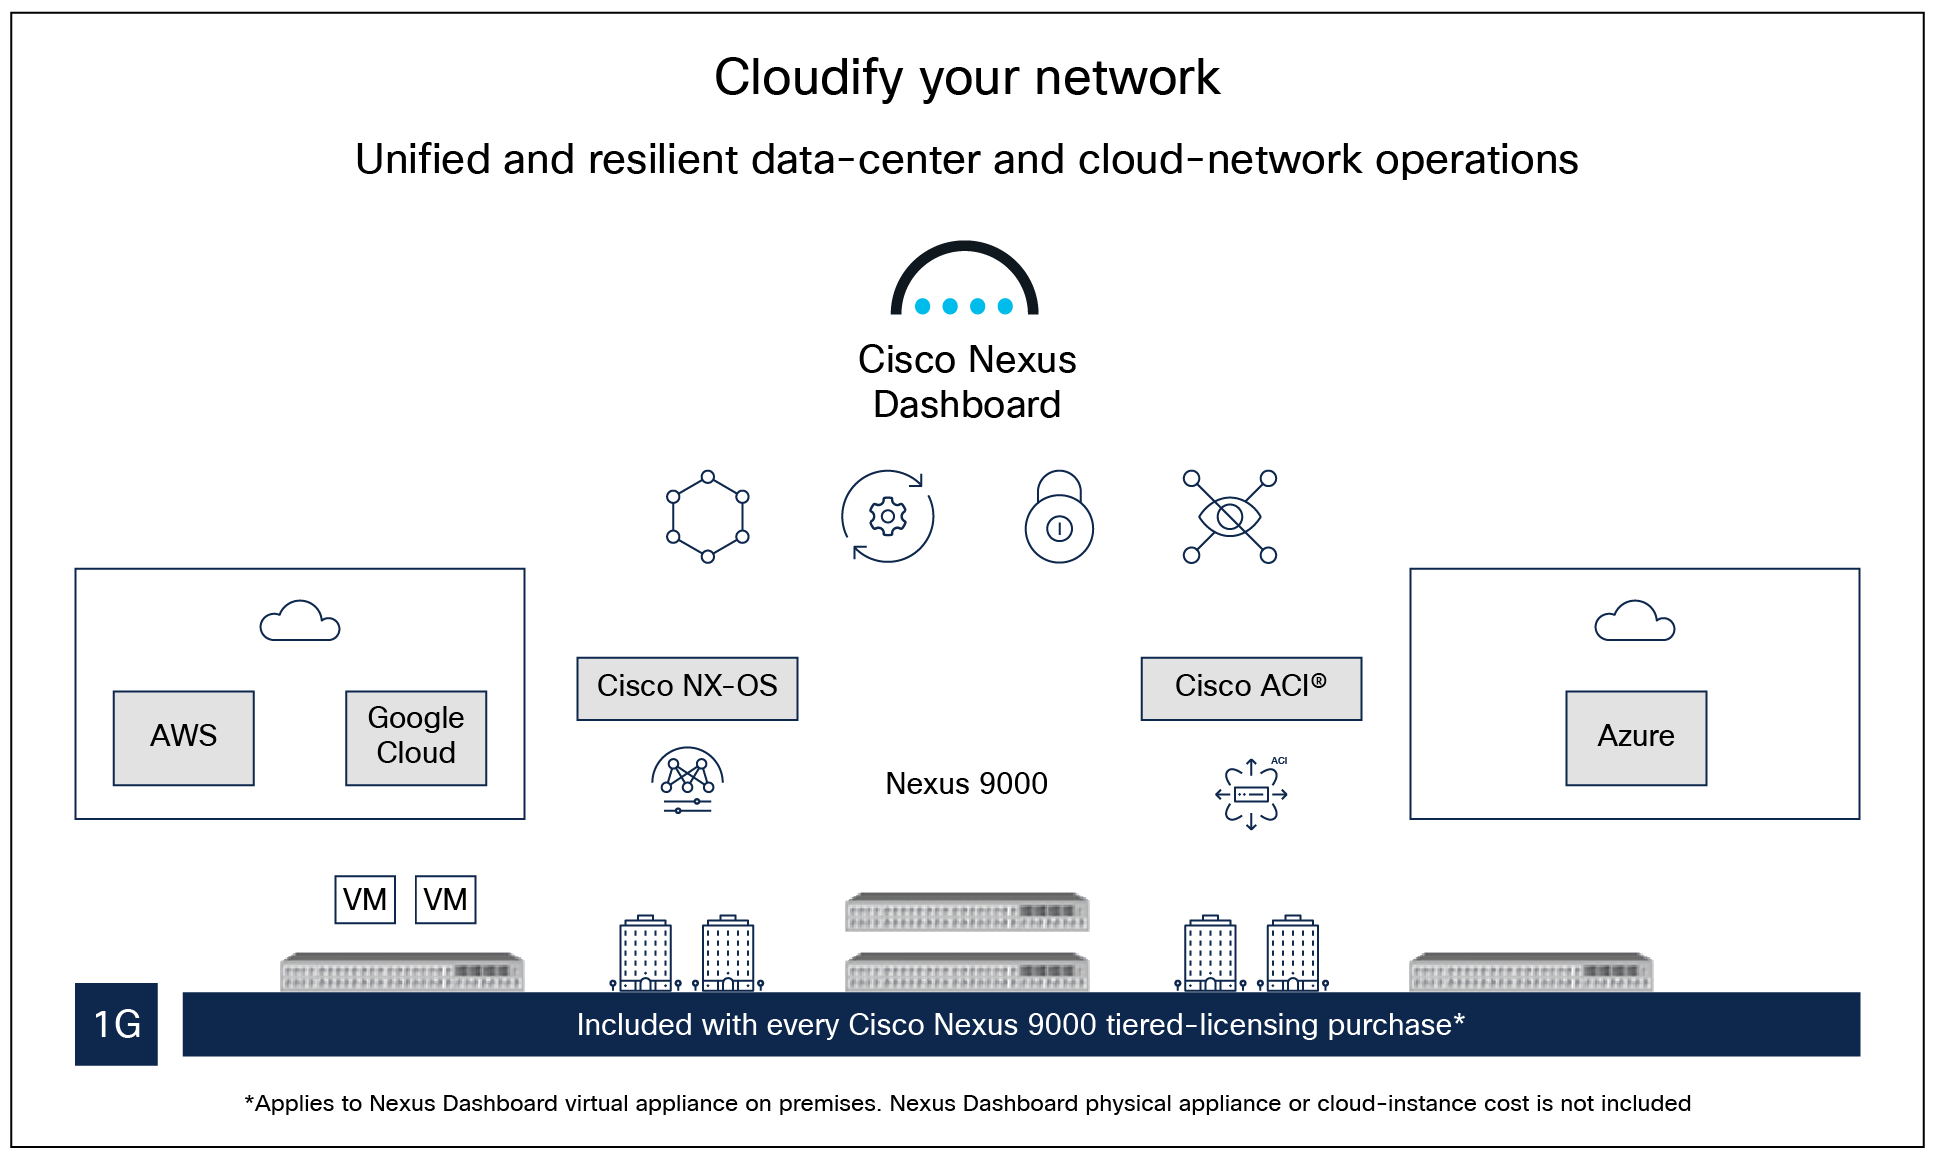 Cisco Nexus Dashboard: powering automation and analytics with a unified, agile, and sustainable networking platform